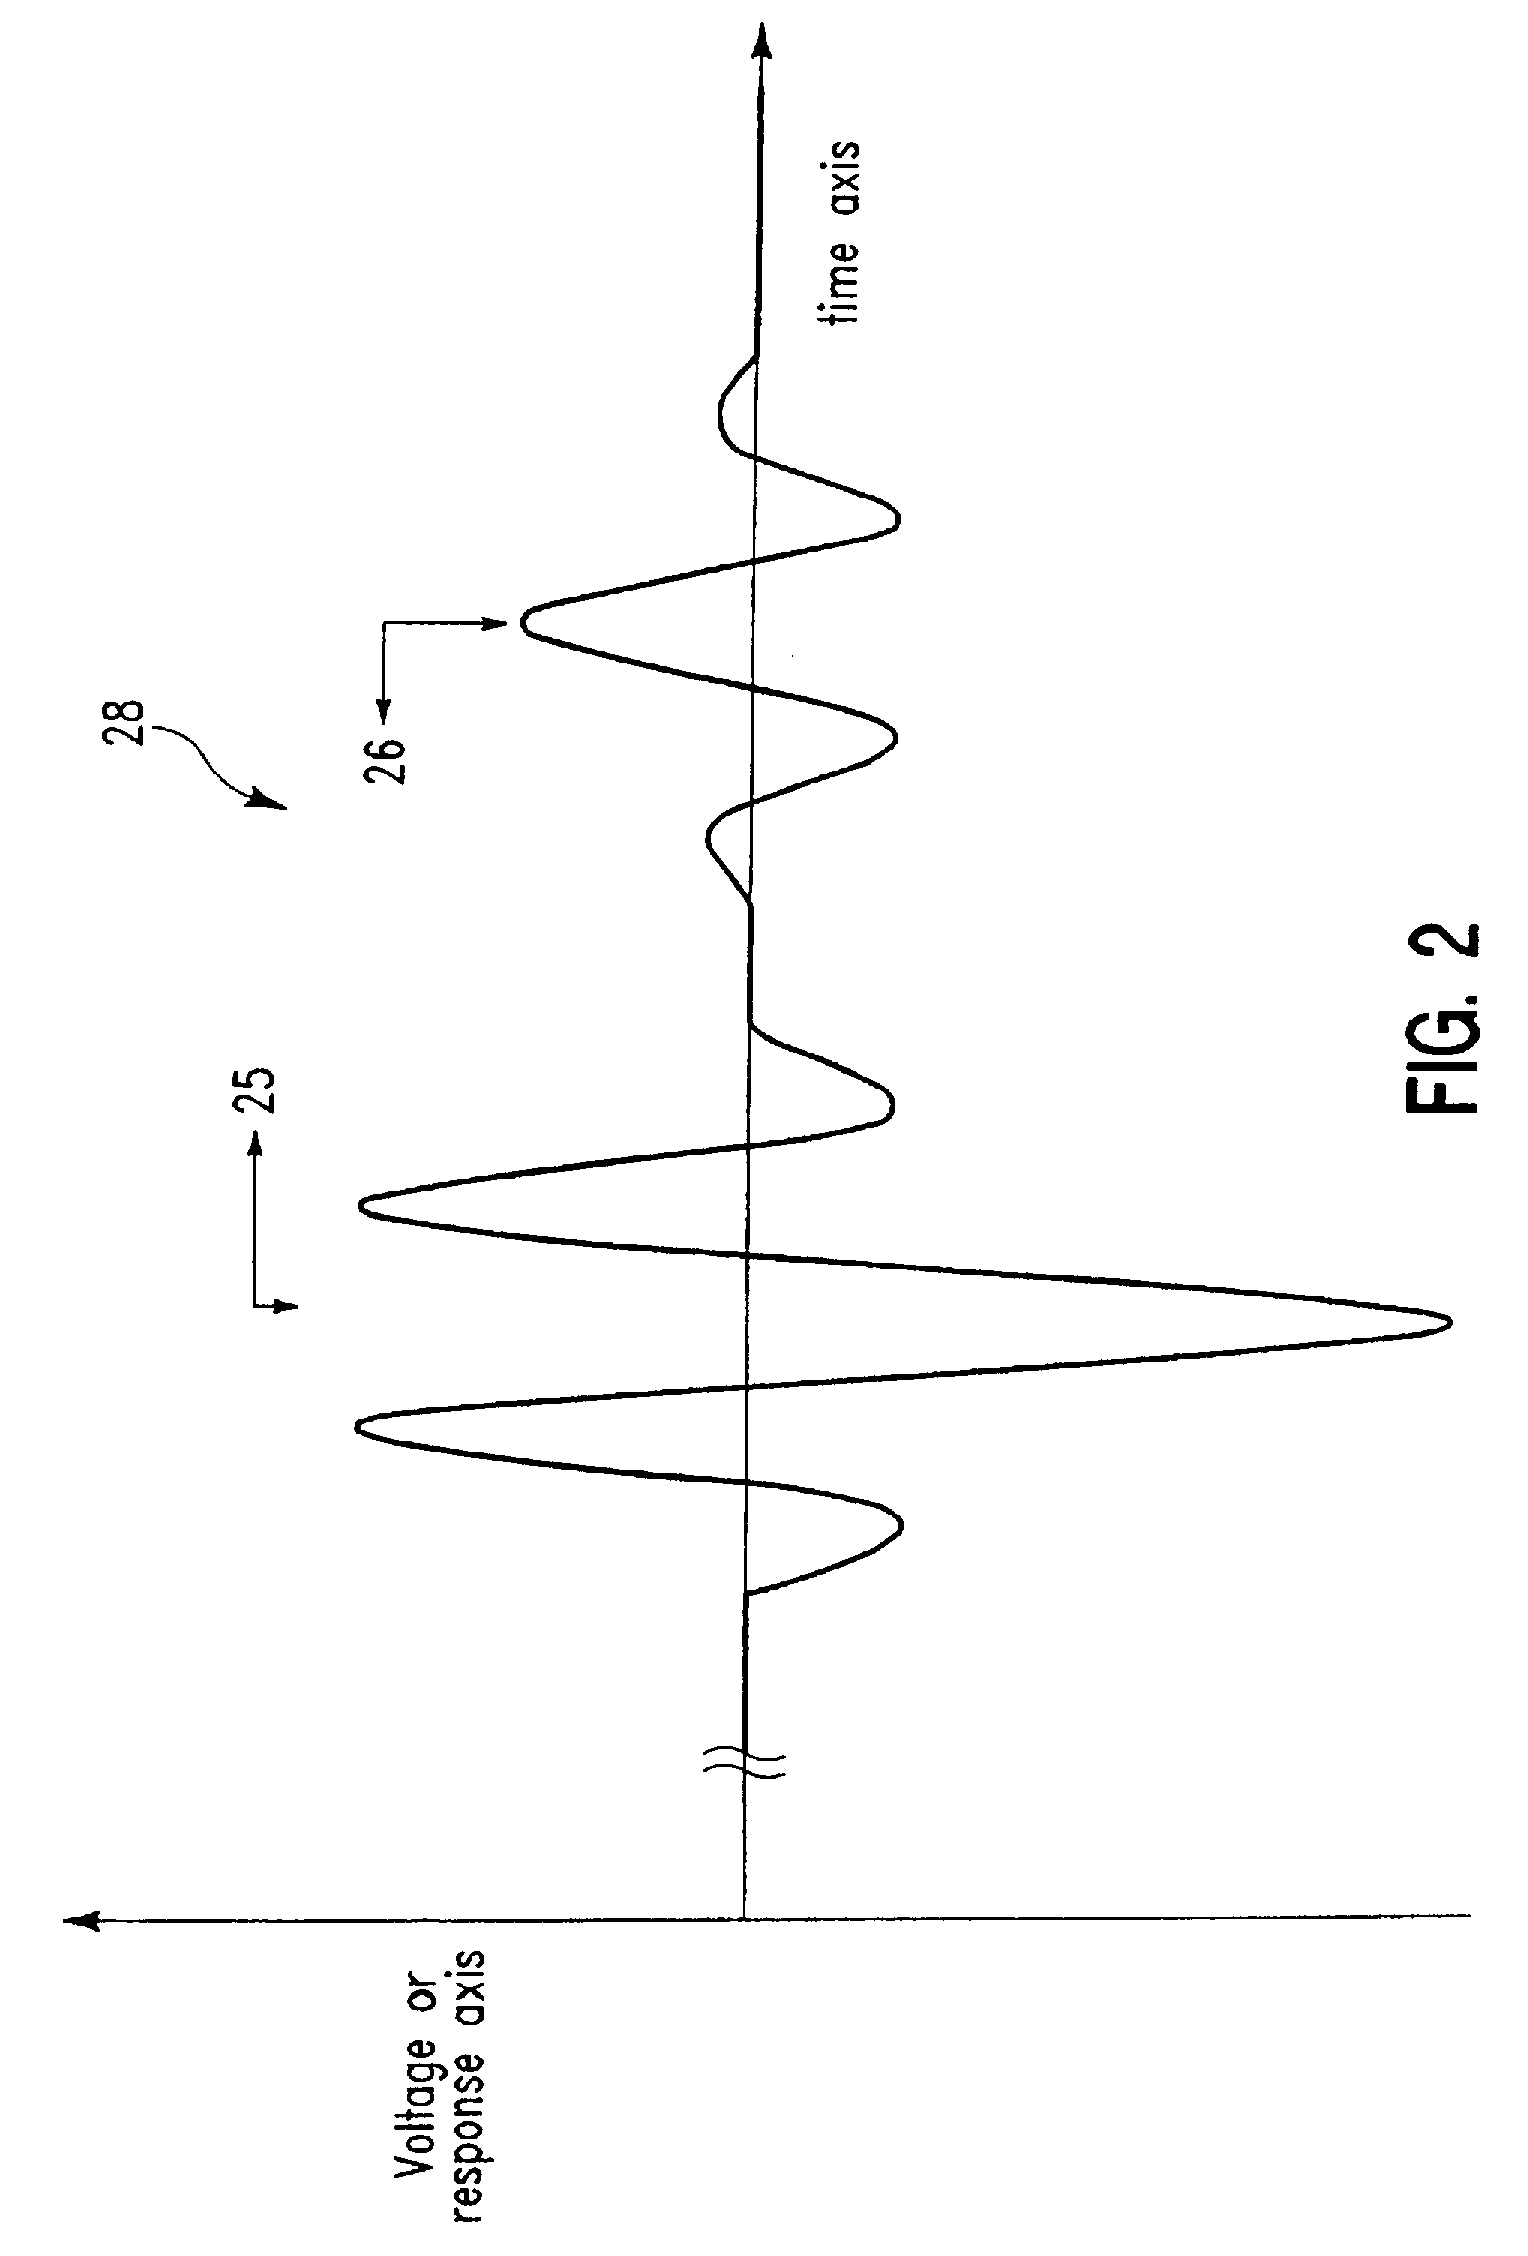 Method for measuring thin layers in solid state devices